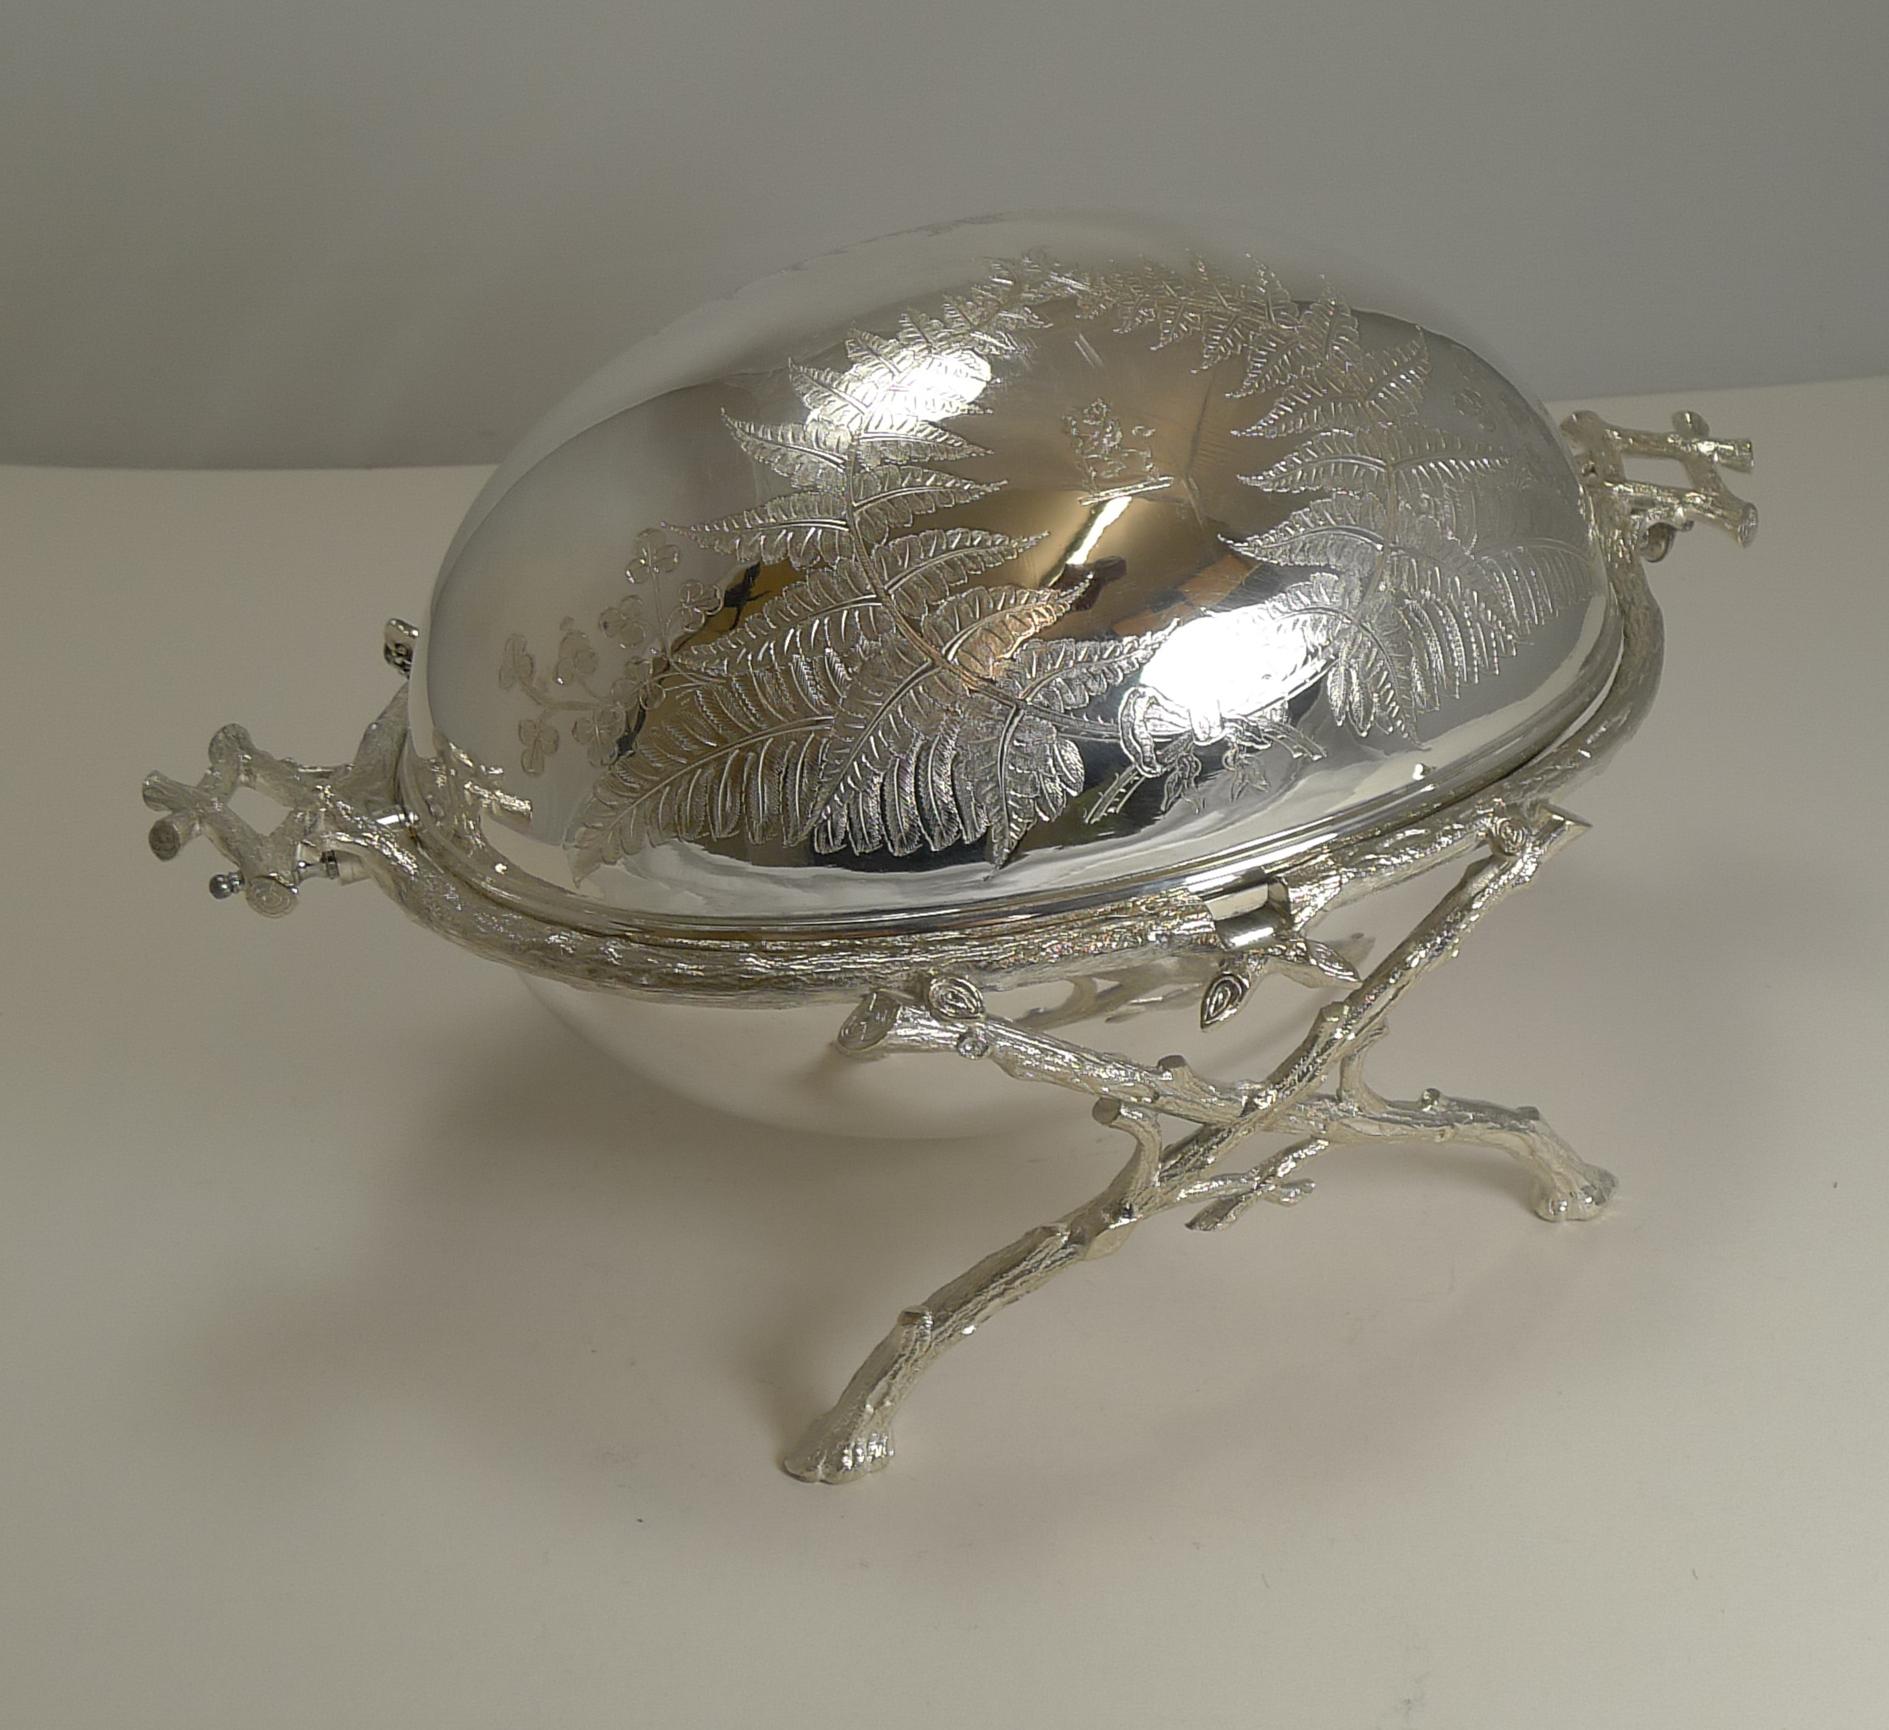 Magnificent Antique English Revolving Breakfast Dish by Atkin Brothers 3